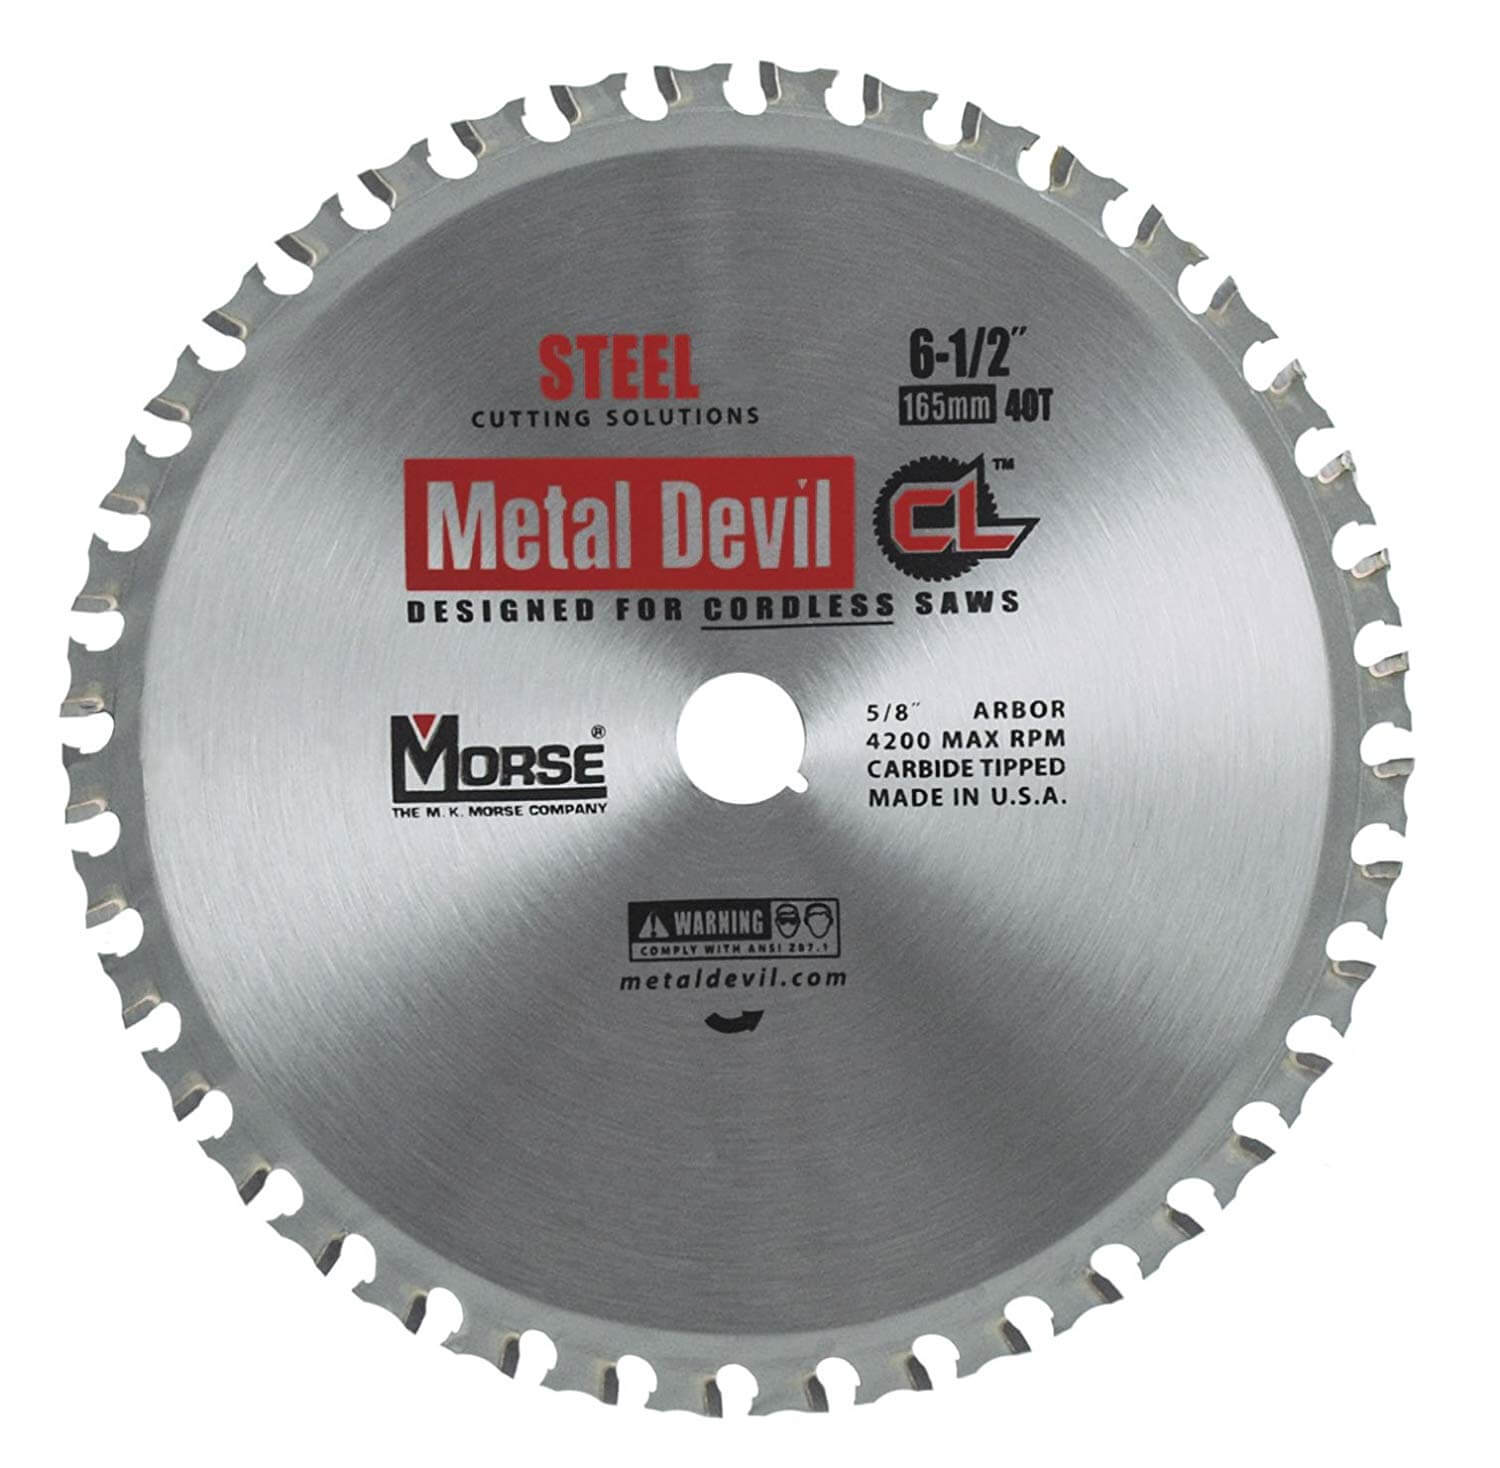 Morse 6-1/2" 40T Metal Cutting Saw Blade - wise-line-tools